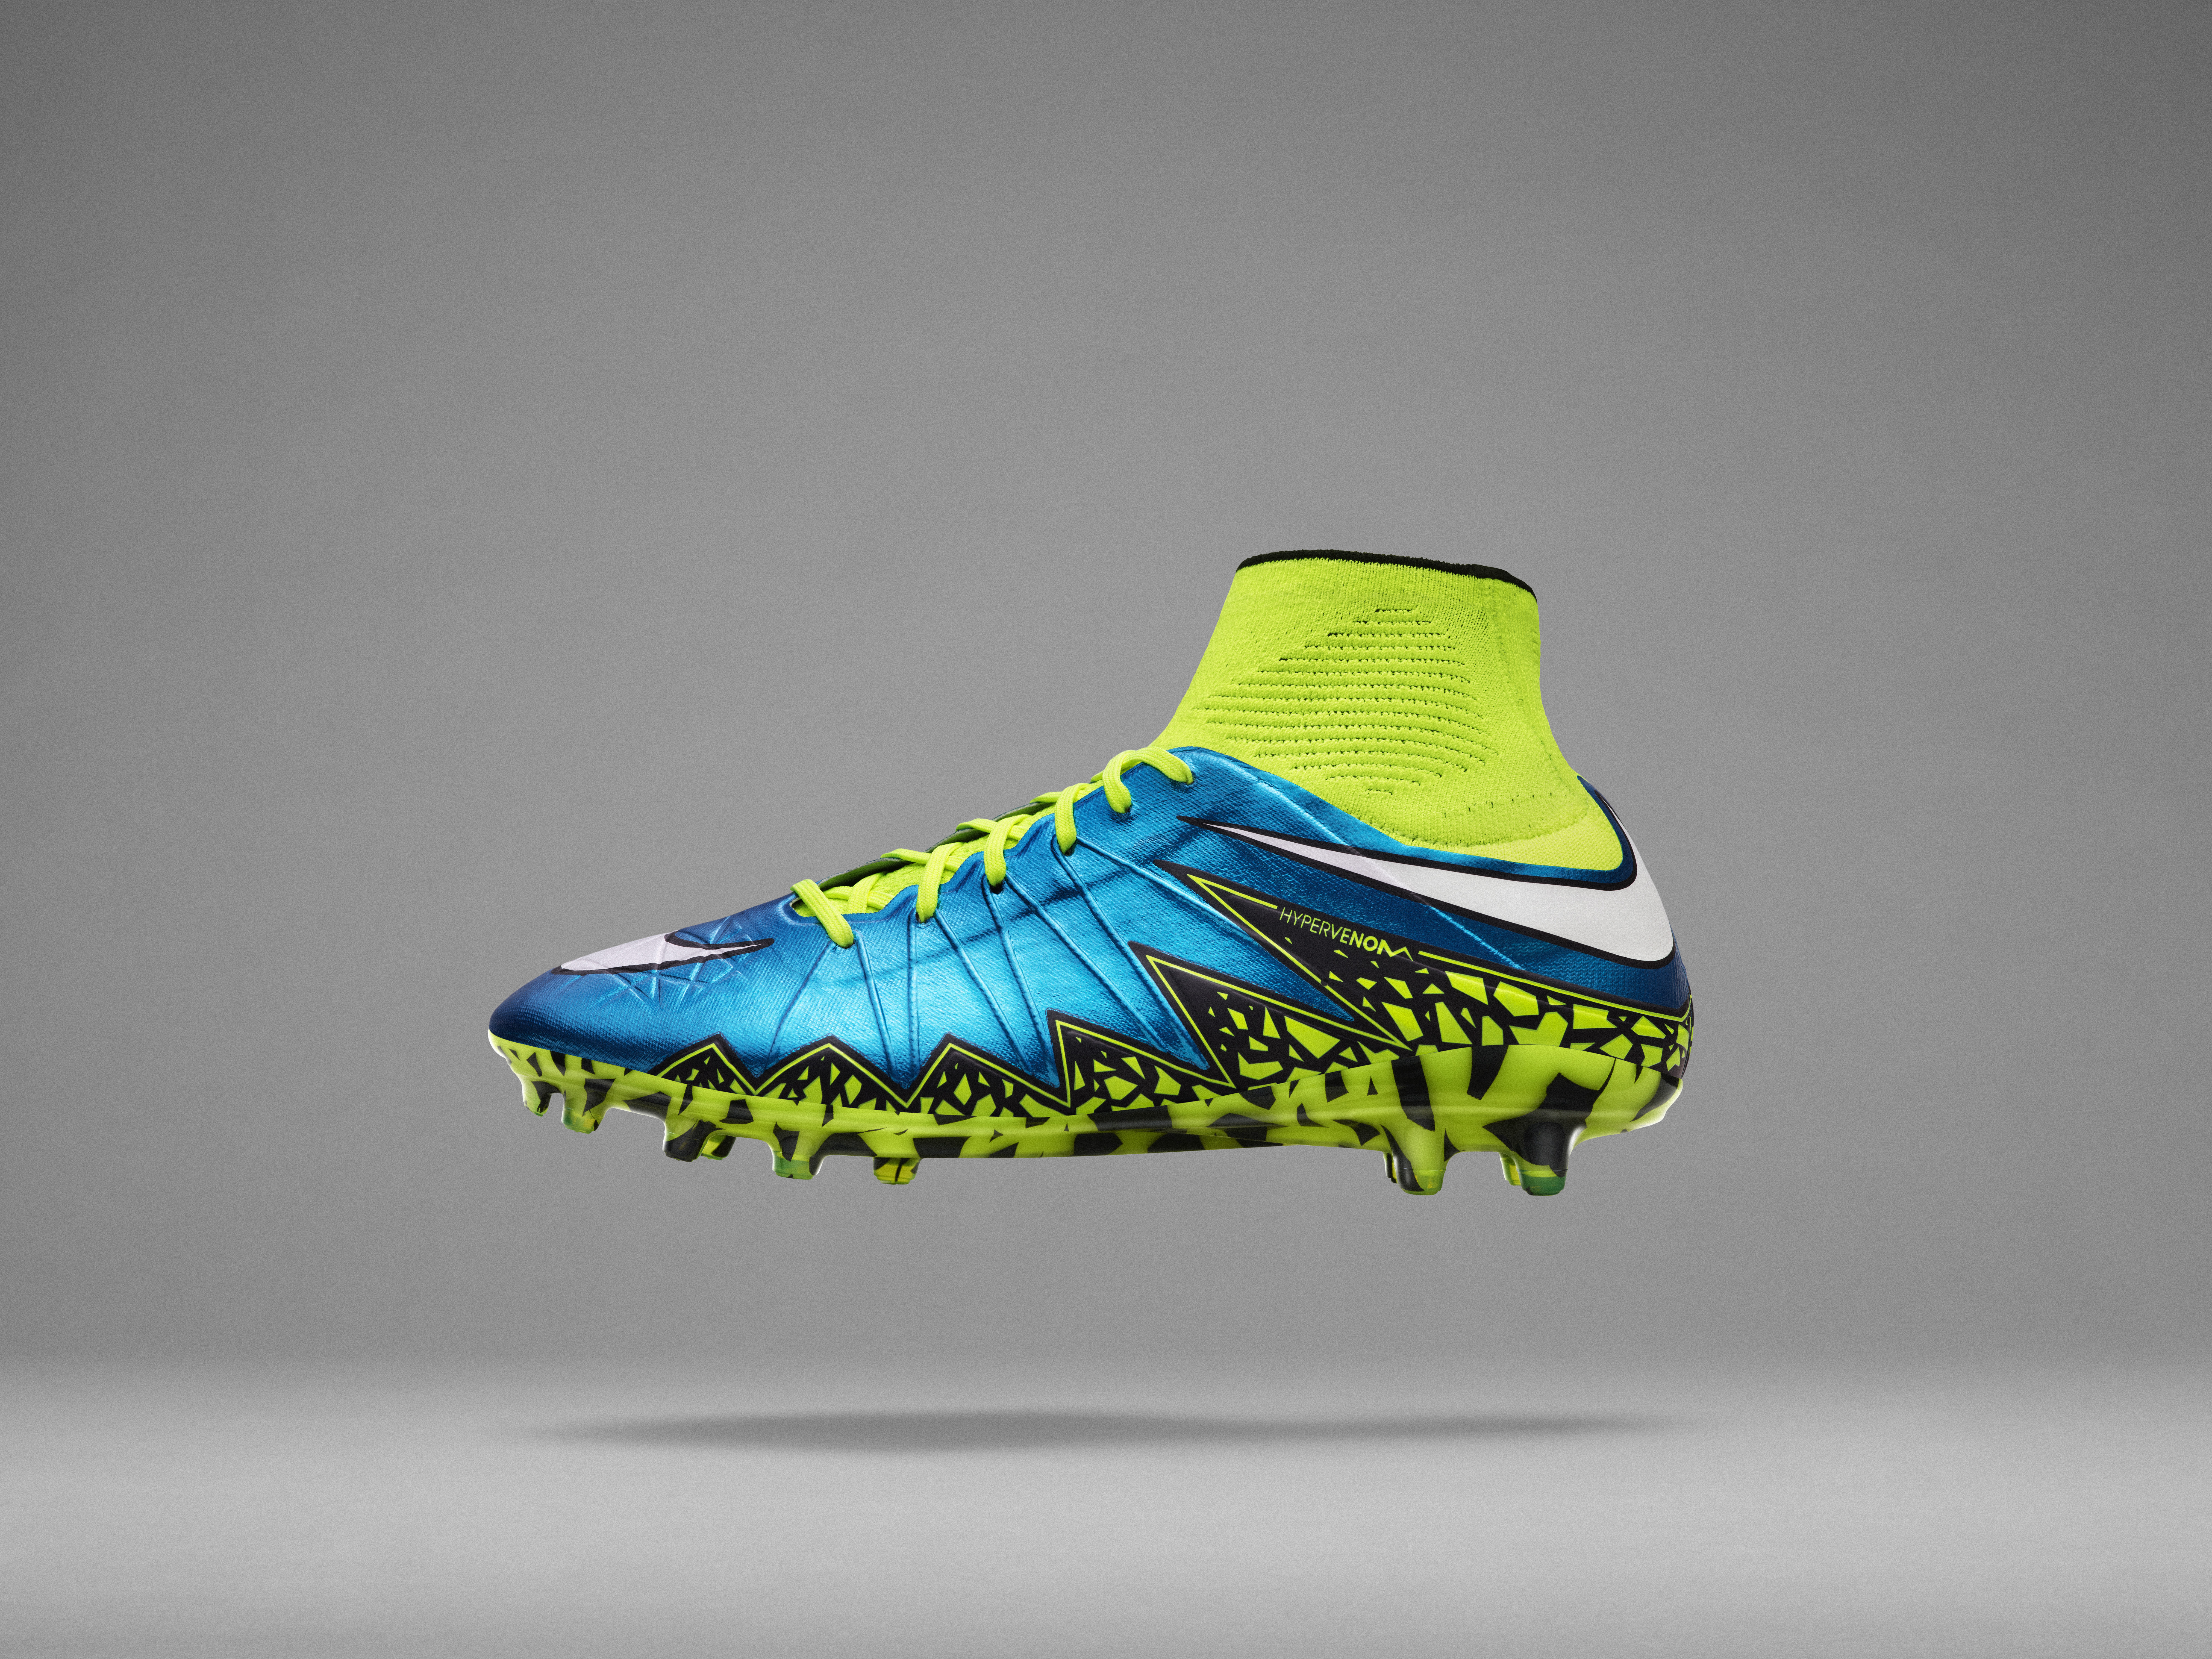 These are the neon cleats Alex Morgan 